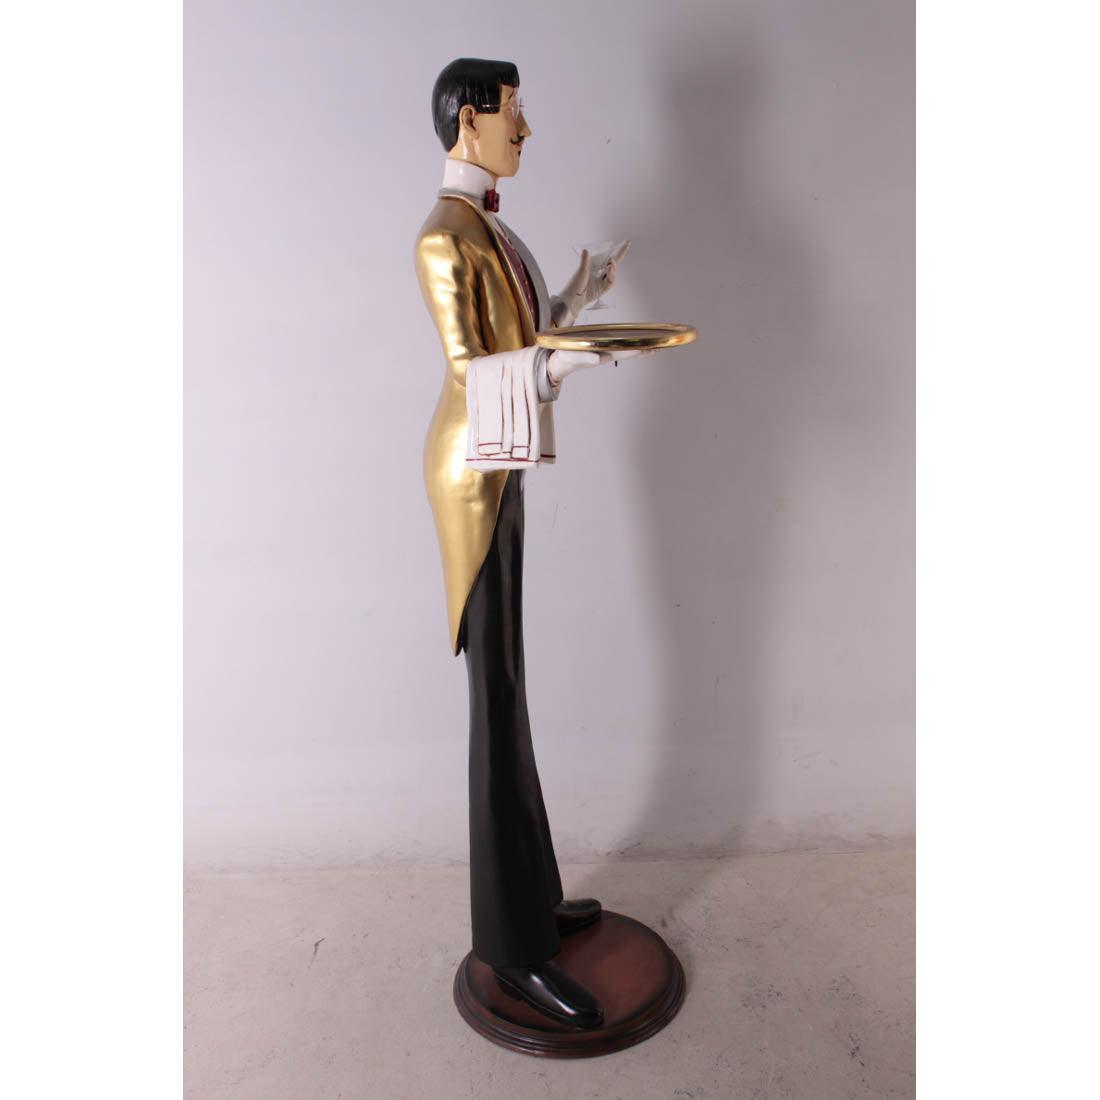 Frenchman Waiter Life Size Statue - LM Treasures Prop Rentals 